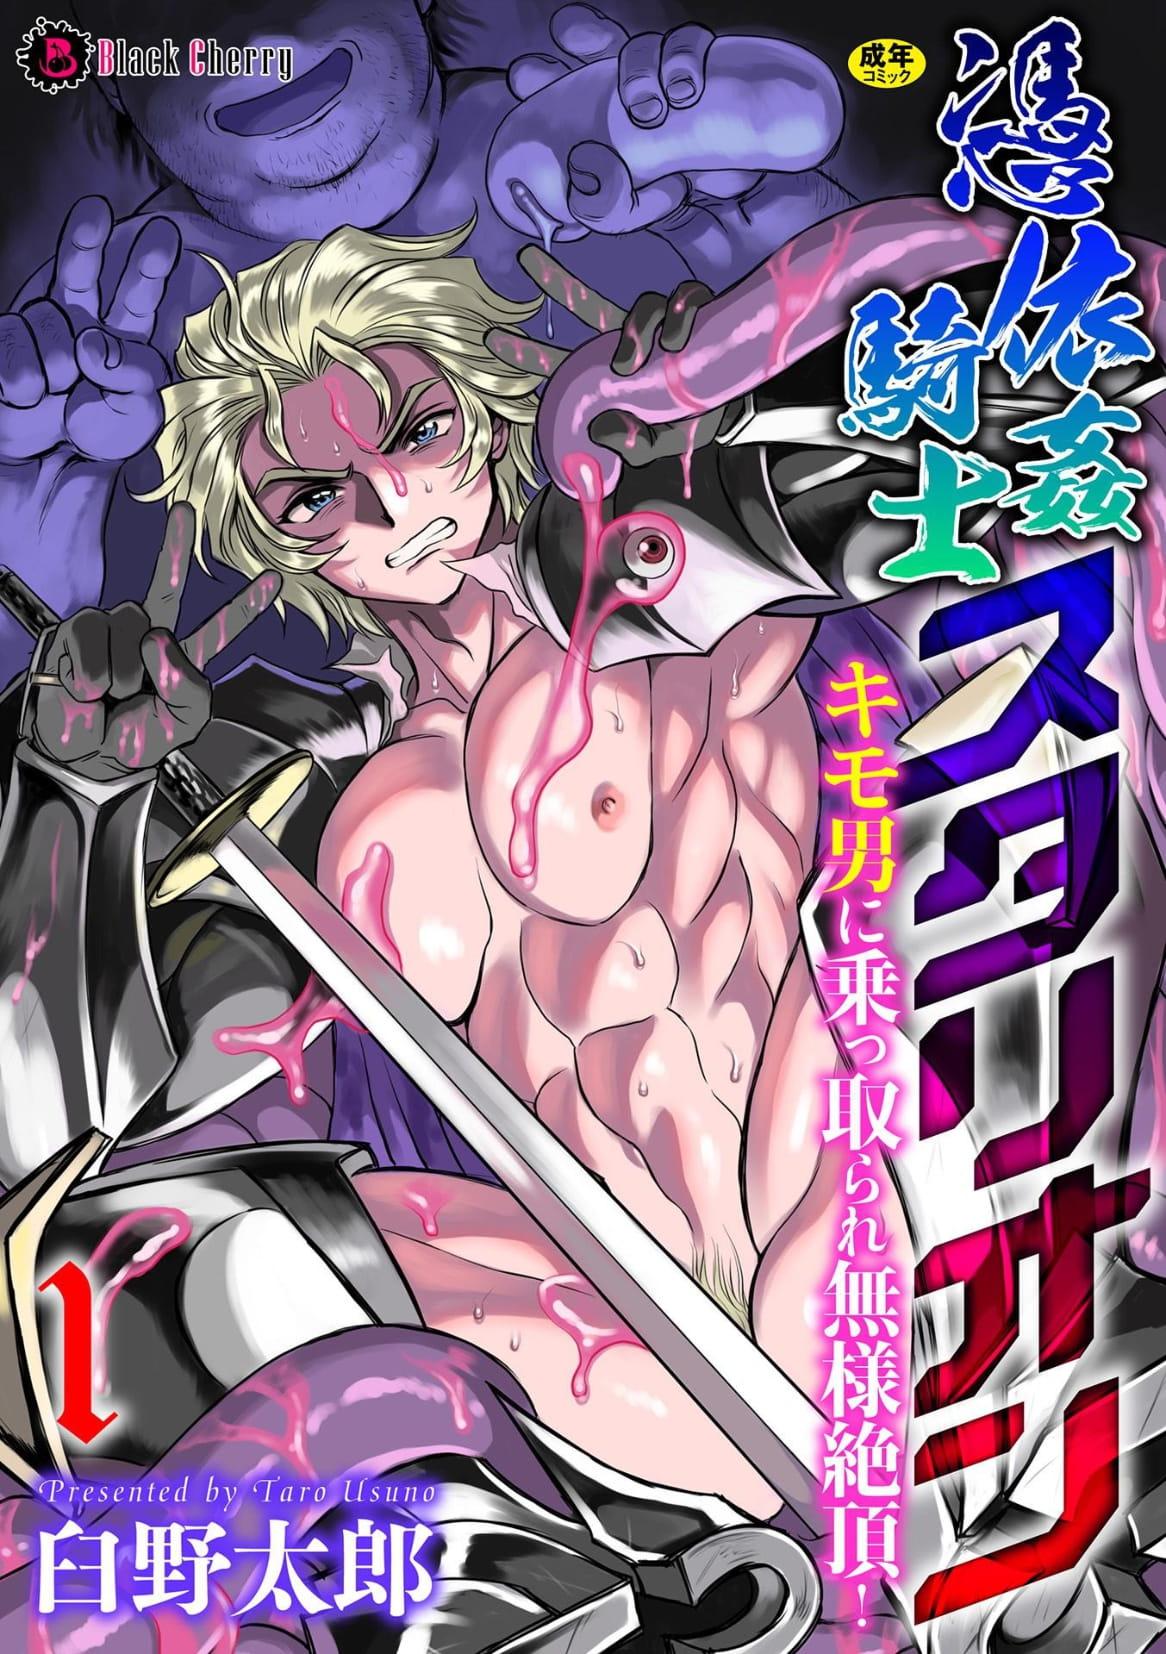 [Usuno Taro] Possessed Knight Stallion-Taken Over By Disgusting Man Raped and Climaxes Unsightly - English 1